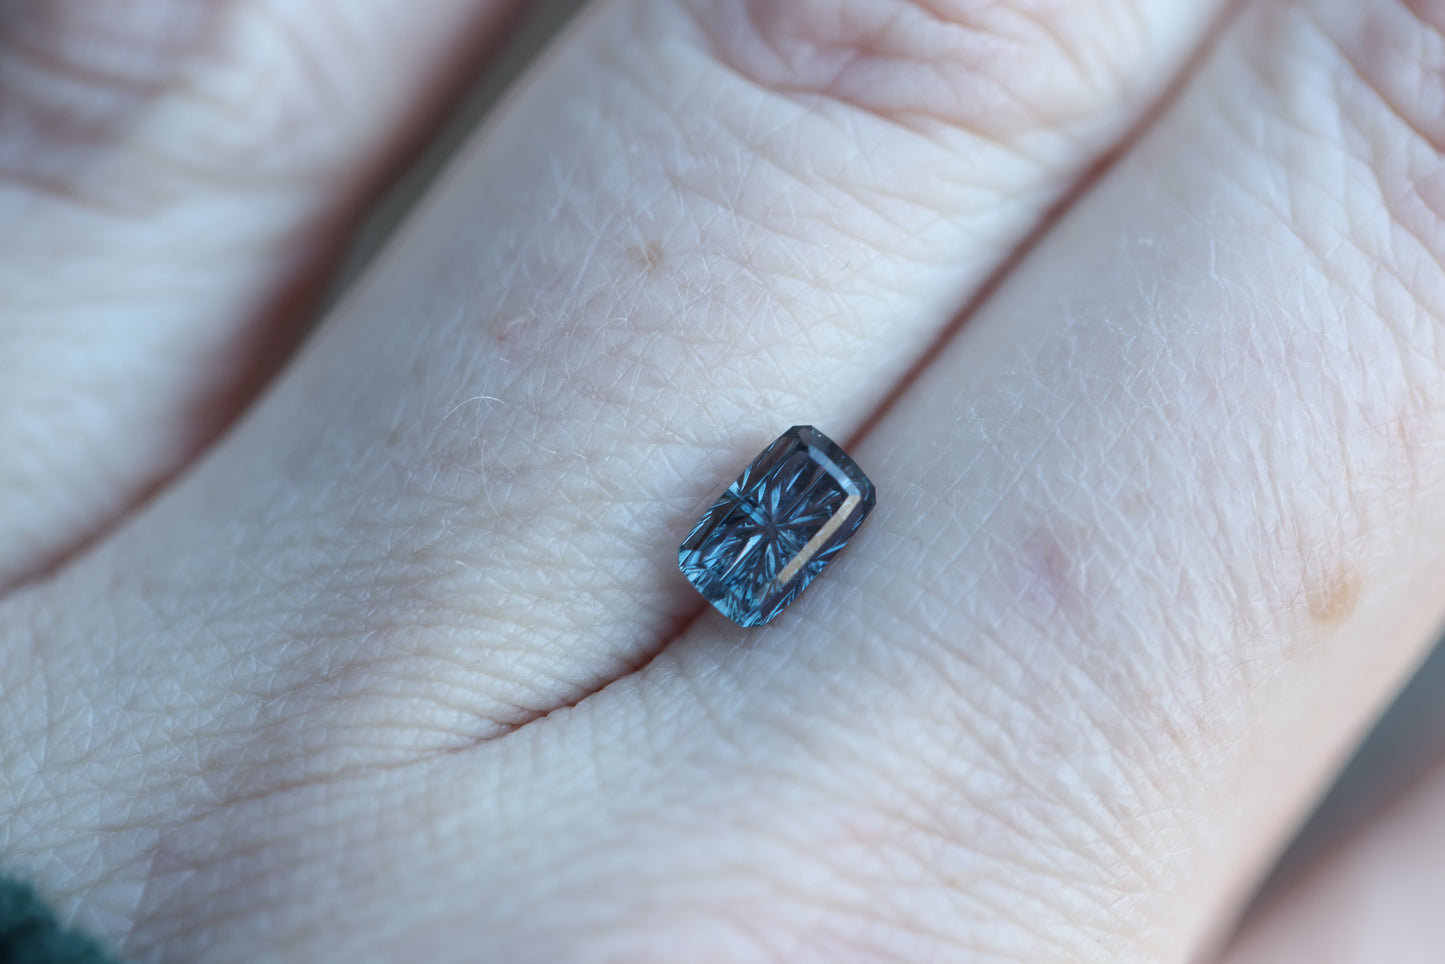 Load image into Gallery viewer, 1.21ct blue to purple color change rectangle sapphire- Starbrite cut by John Dyer
